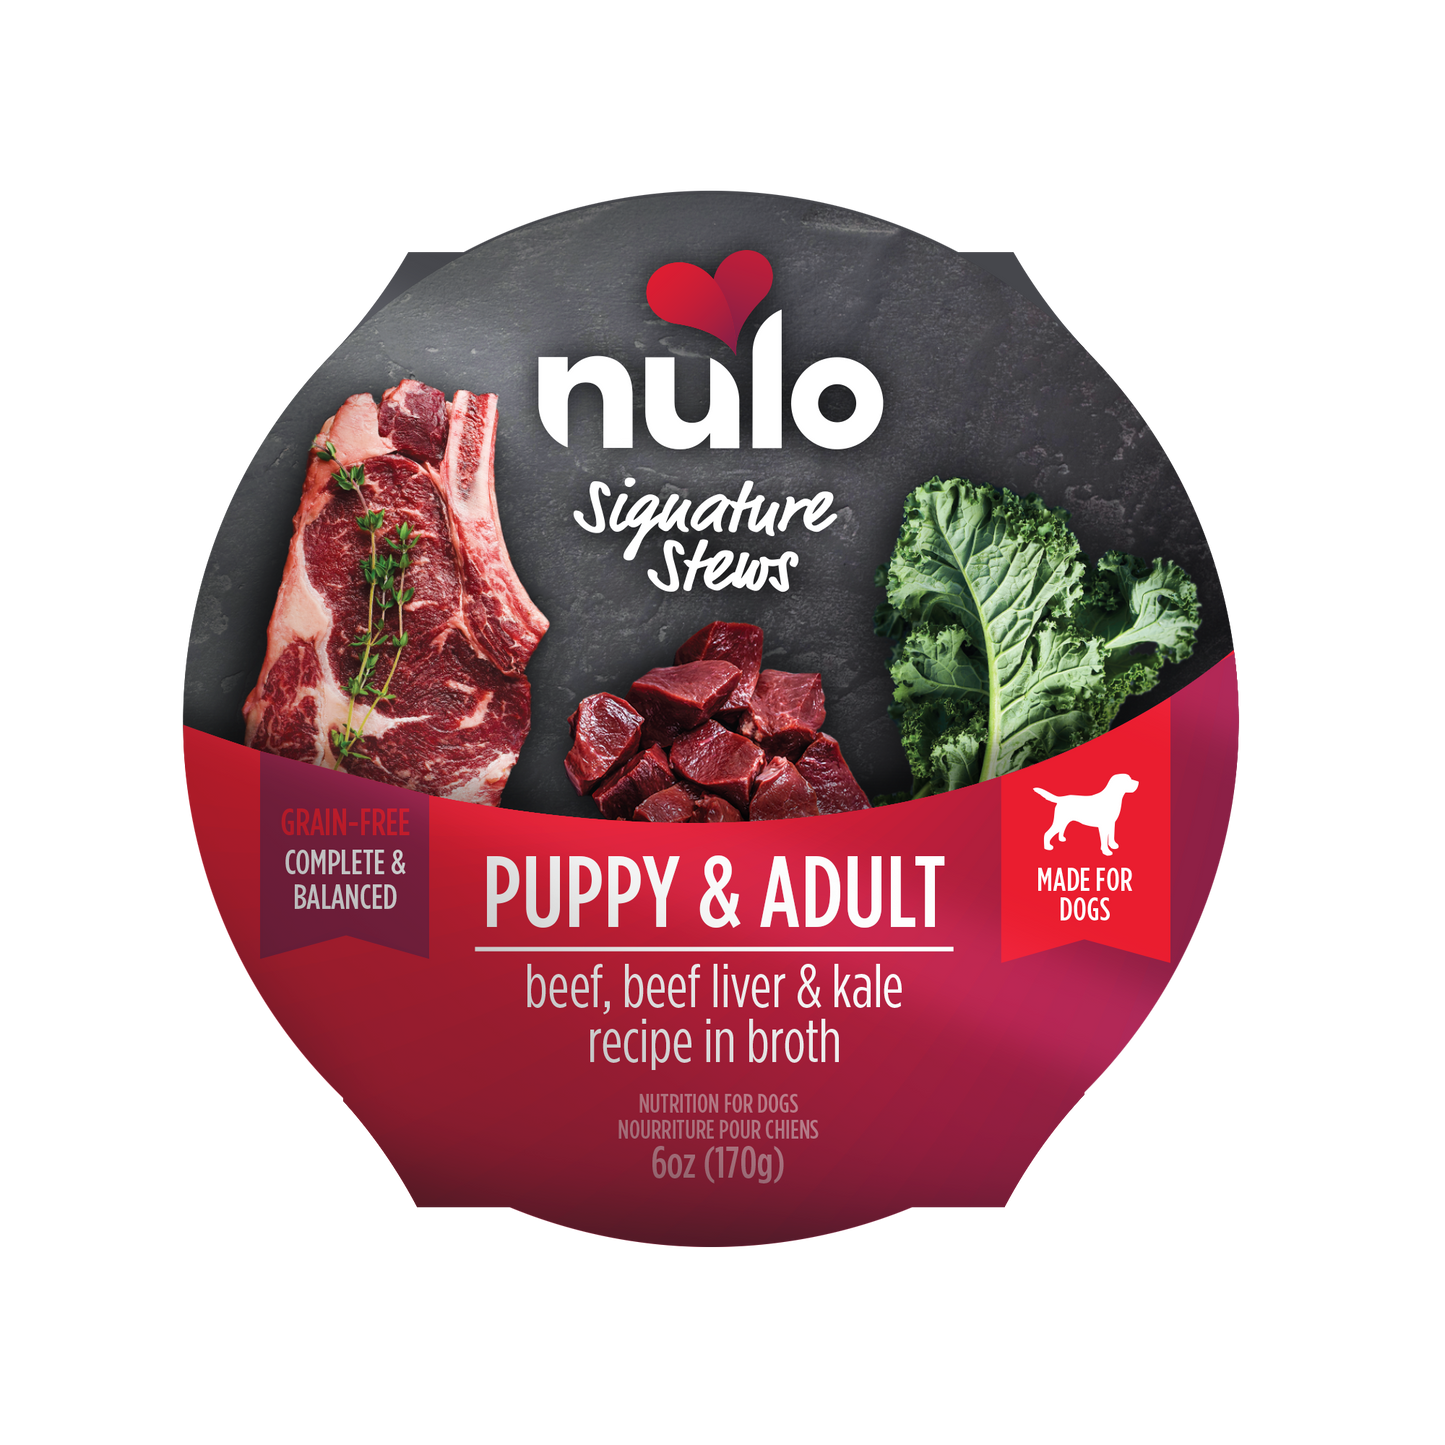 Nulo Signature Stews Grain-Free Beef, Beef Liver, & Kale In Broth Recipe 6-oz, Wet Dog Food